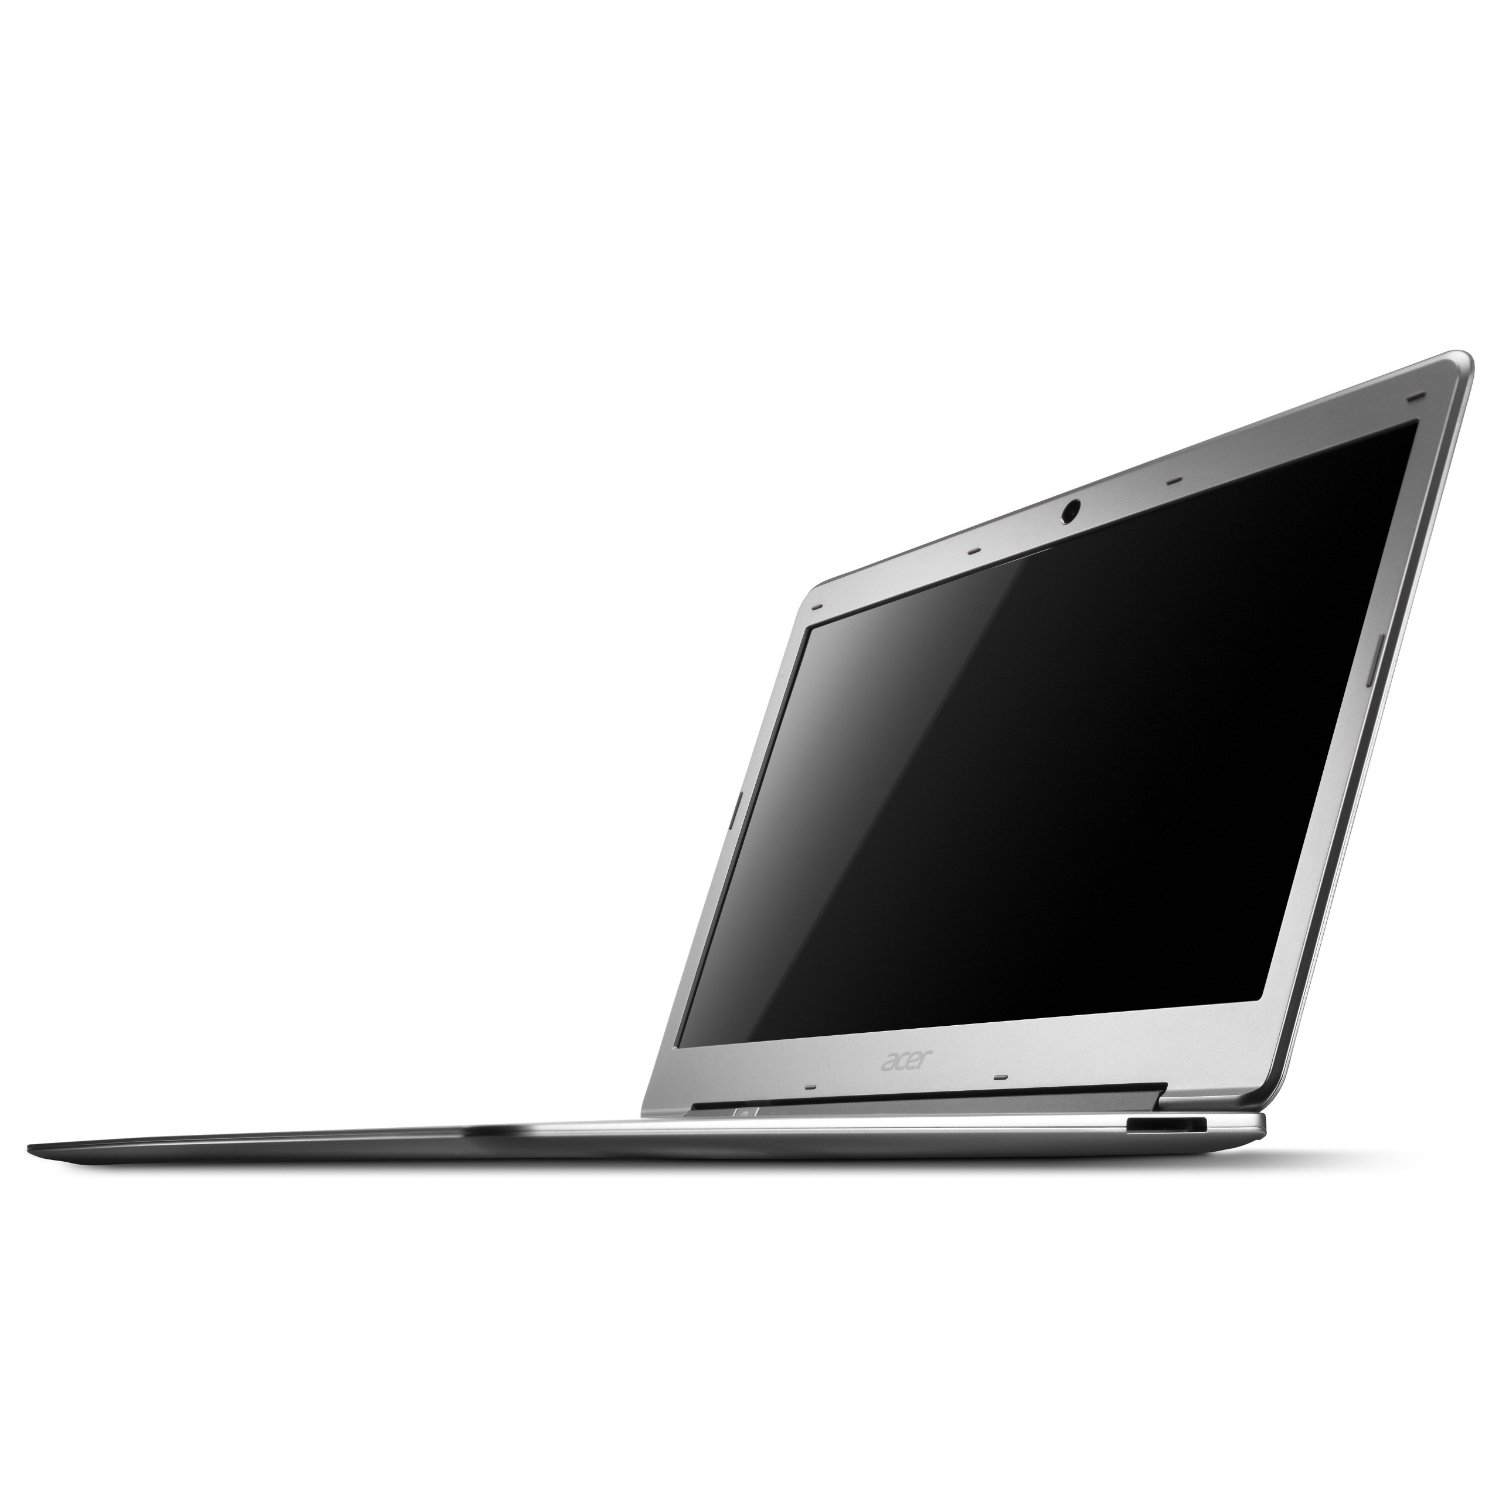 http://thetechjournal.com/wp-content/uploads/images/1204/1335733207-acers-new-aspire-s3-133inch-hd-display-ultrabook-8.jpg